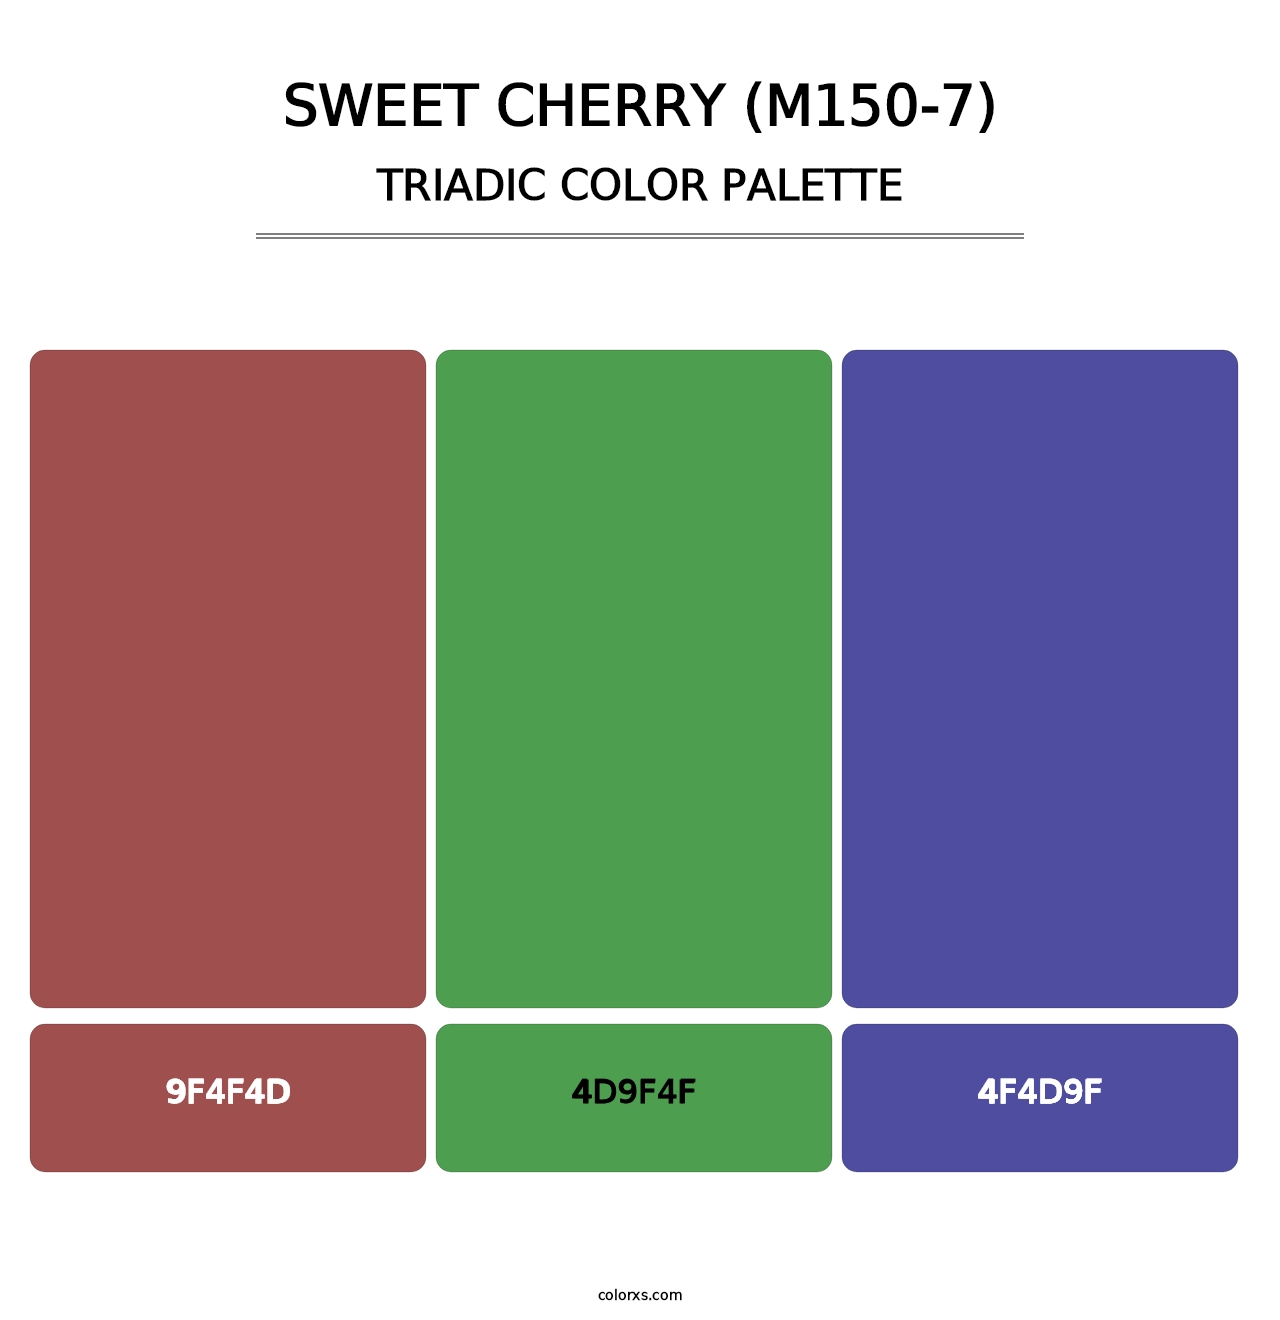 Sweet Cherry (M150-7) - Triadic Color Palette